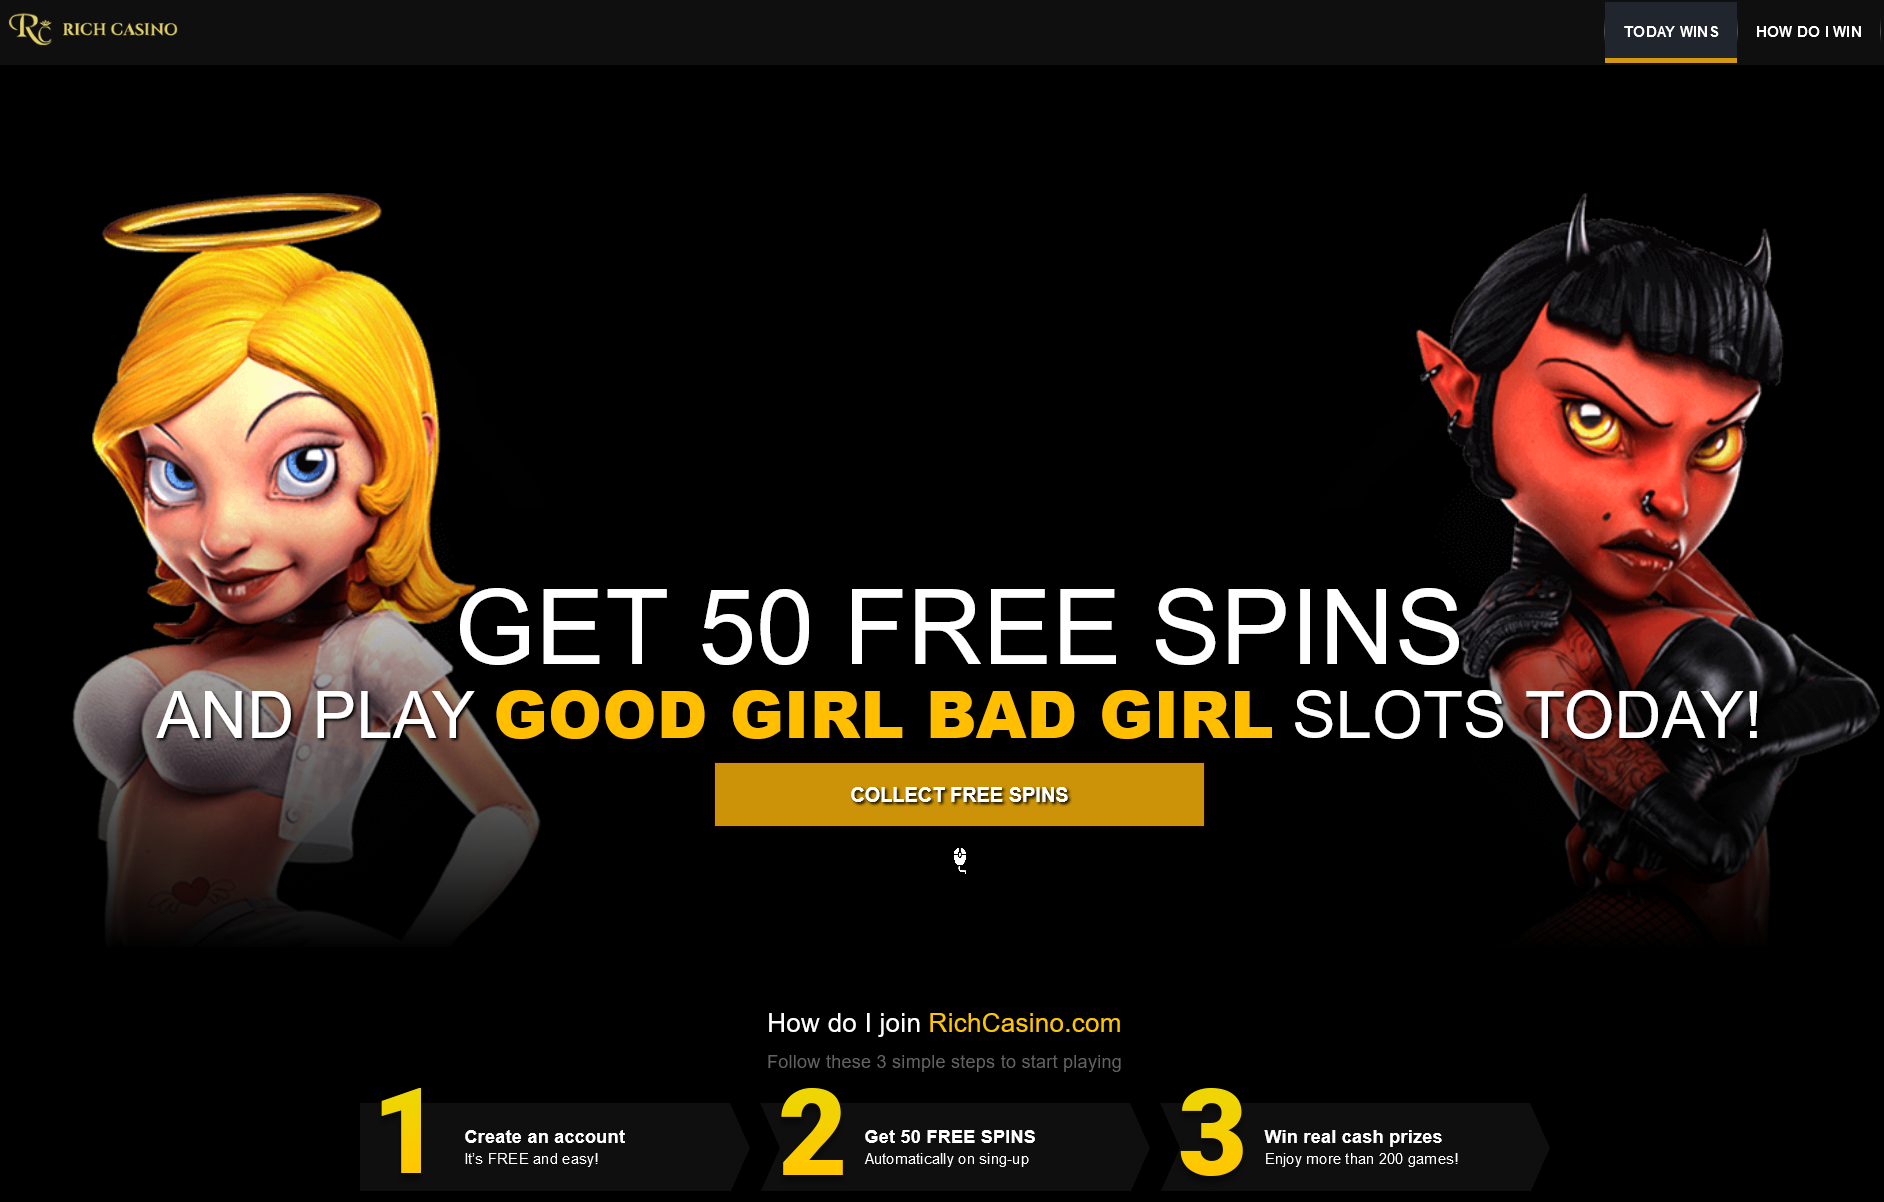 GET 50 FREE SPINS AND PLAY GOOD GIRL BAD GIRL SLOTS TODAY! COLLECT FREE SPINS